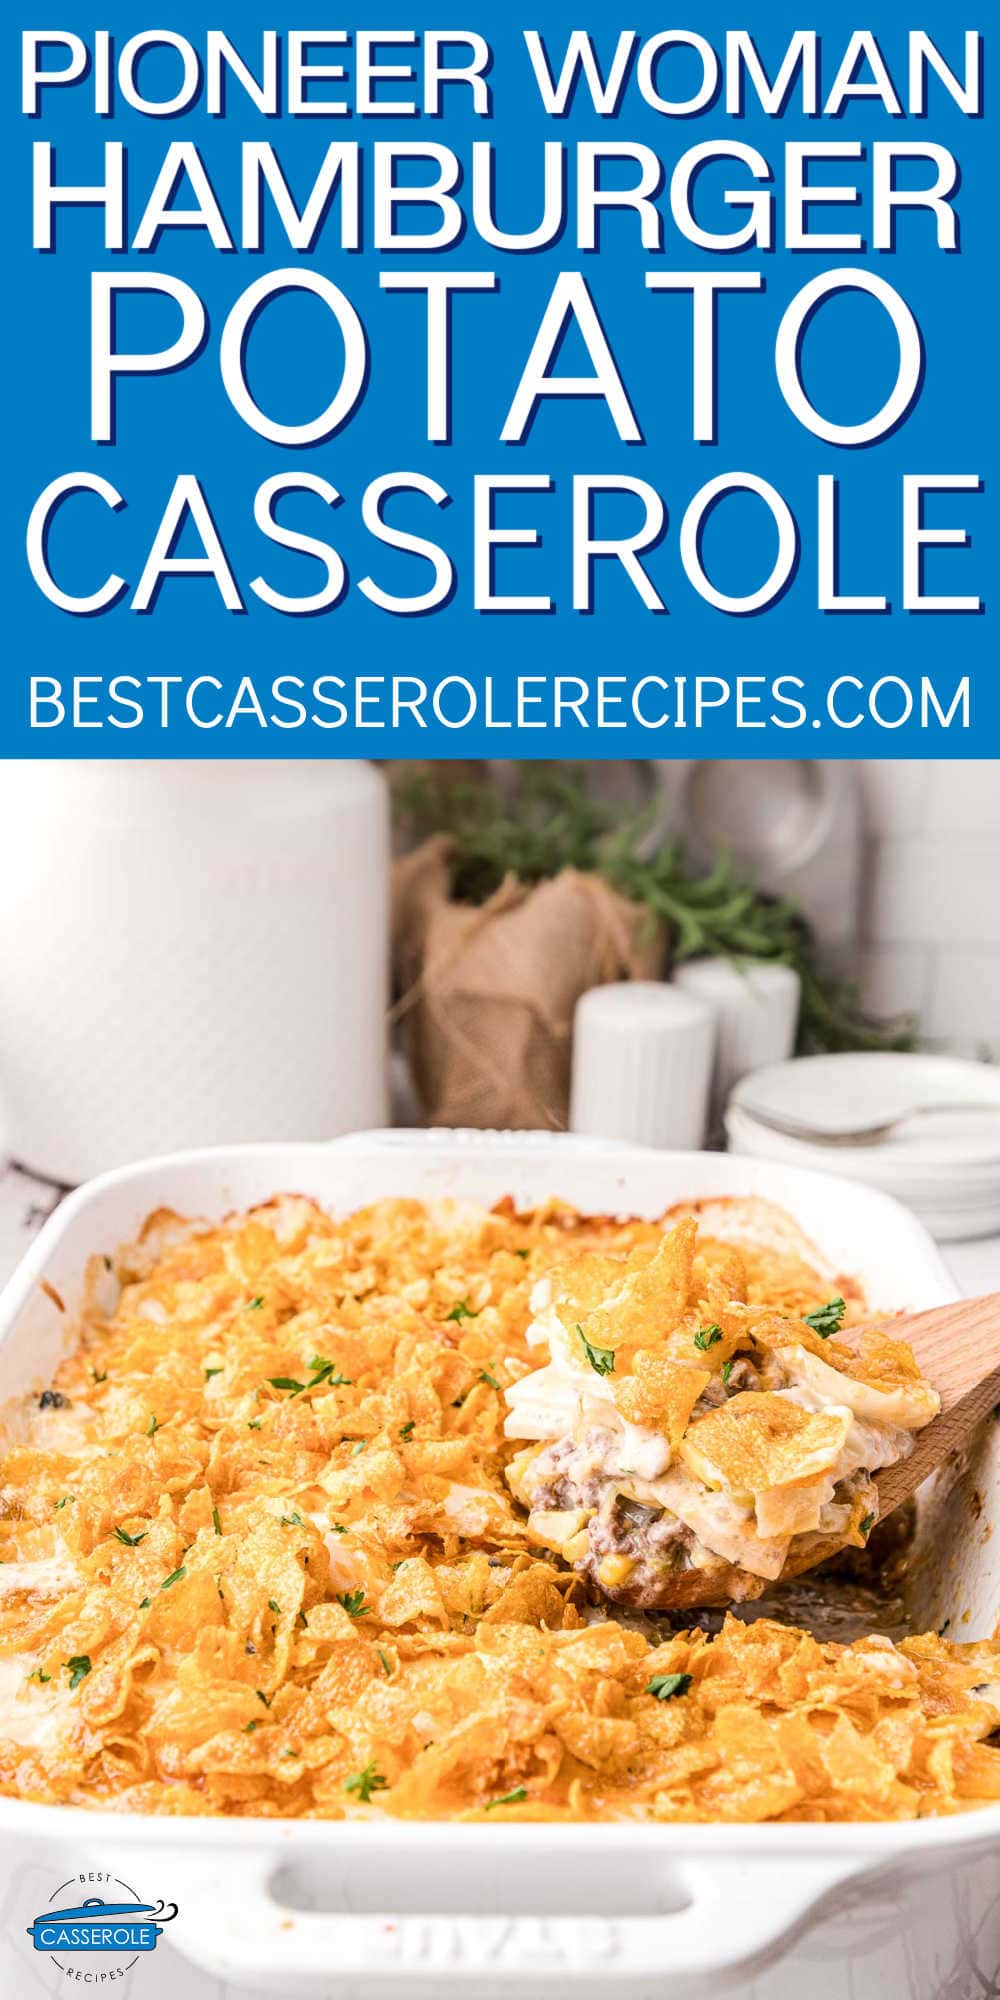 casserole dish with wood spoon and blue banner with white text